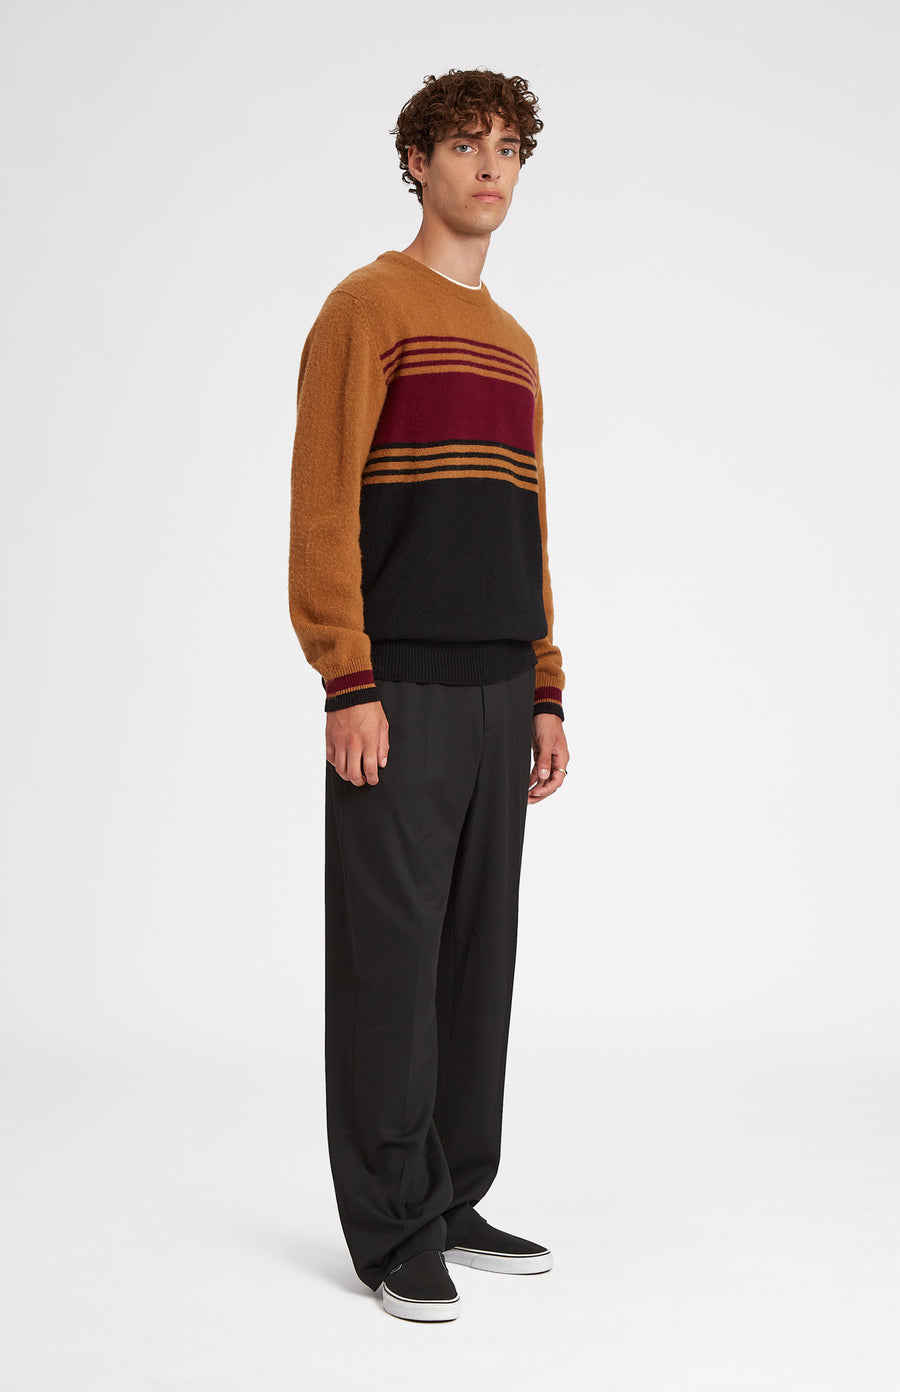 Round Neck Brushed Lambswool Jumper in Vicuna Stripe on model side view - Pringle of Scotland